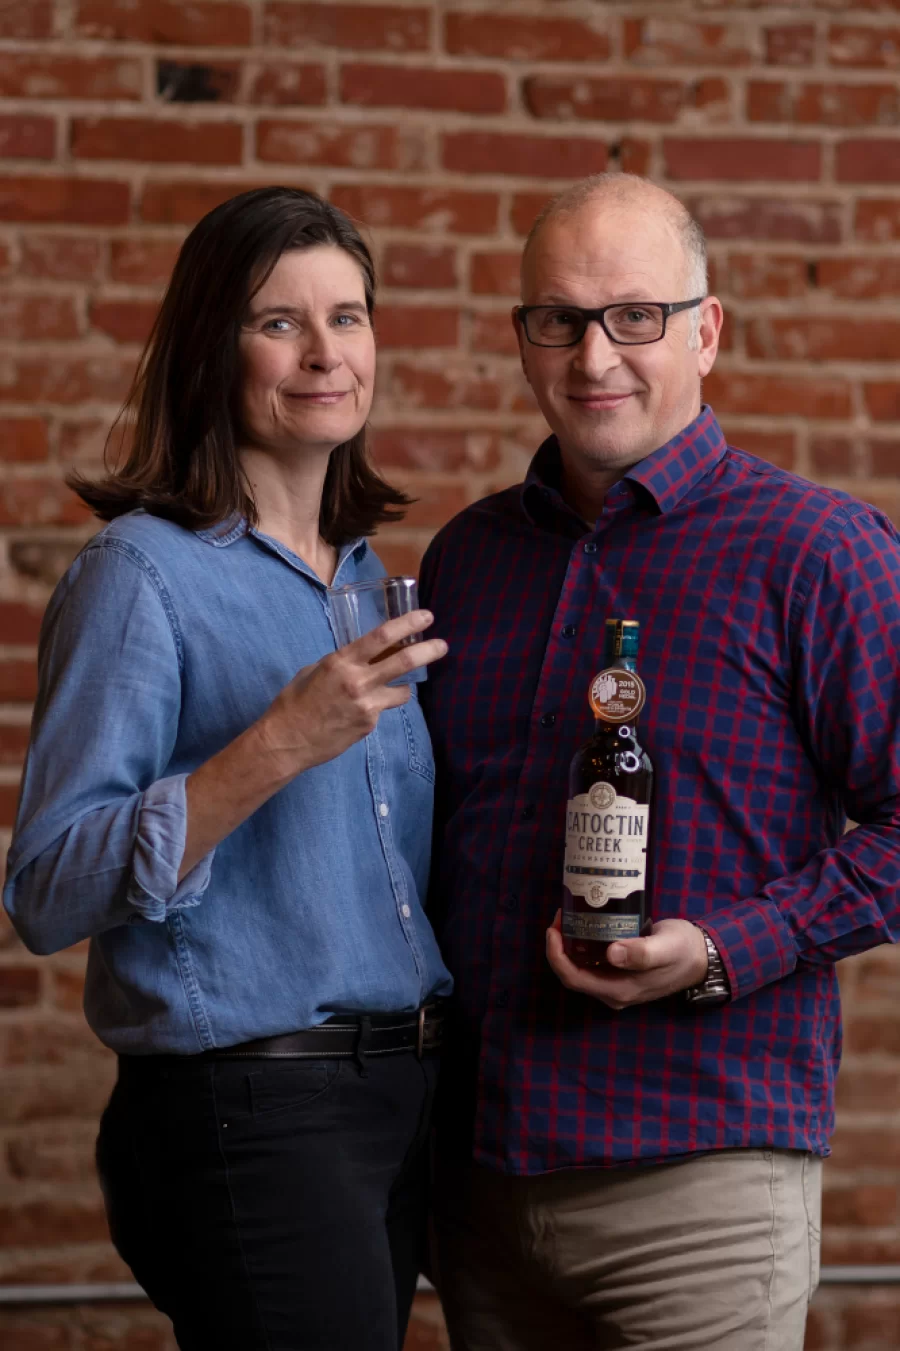 Catoctin Creek Distilling Company Reacquires Company From Constellation Brands